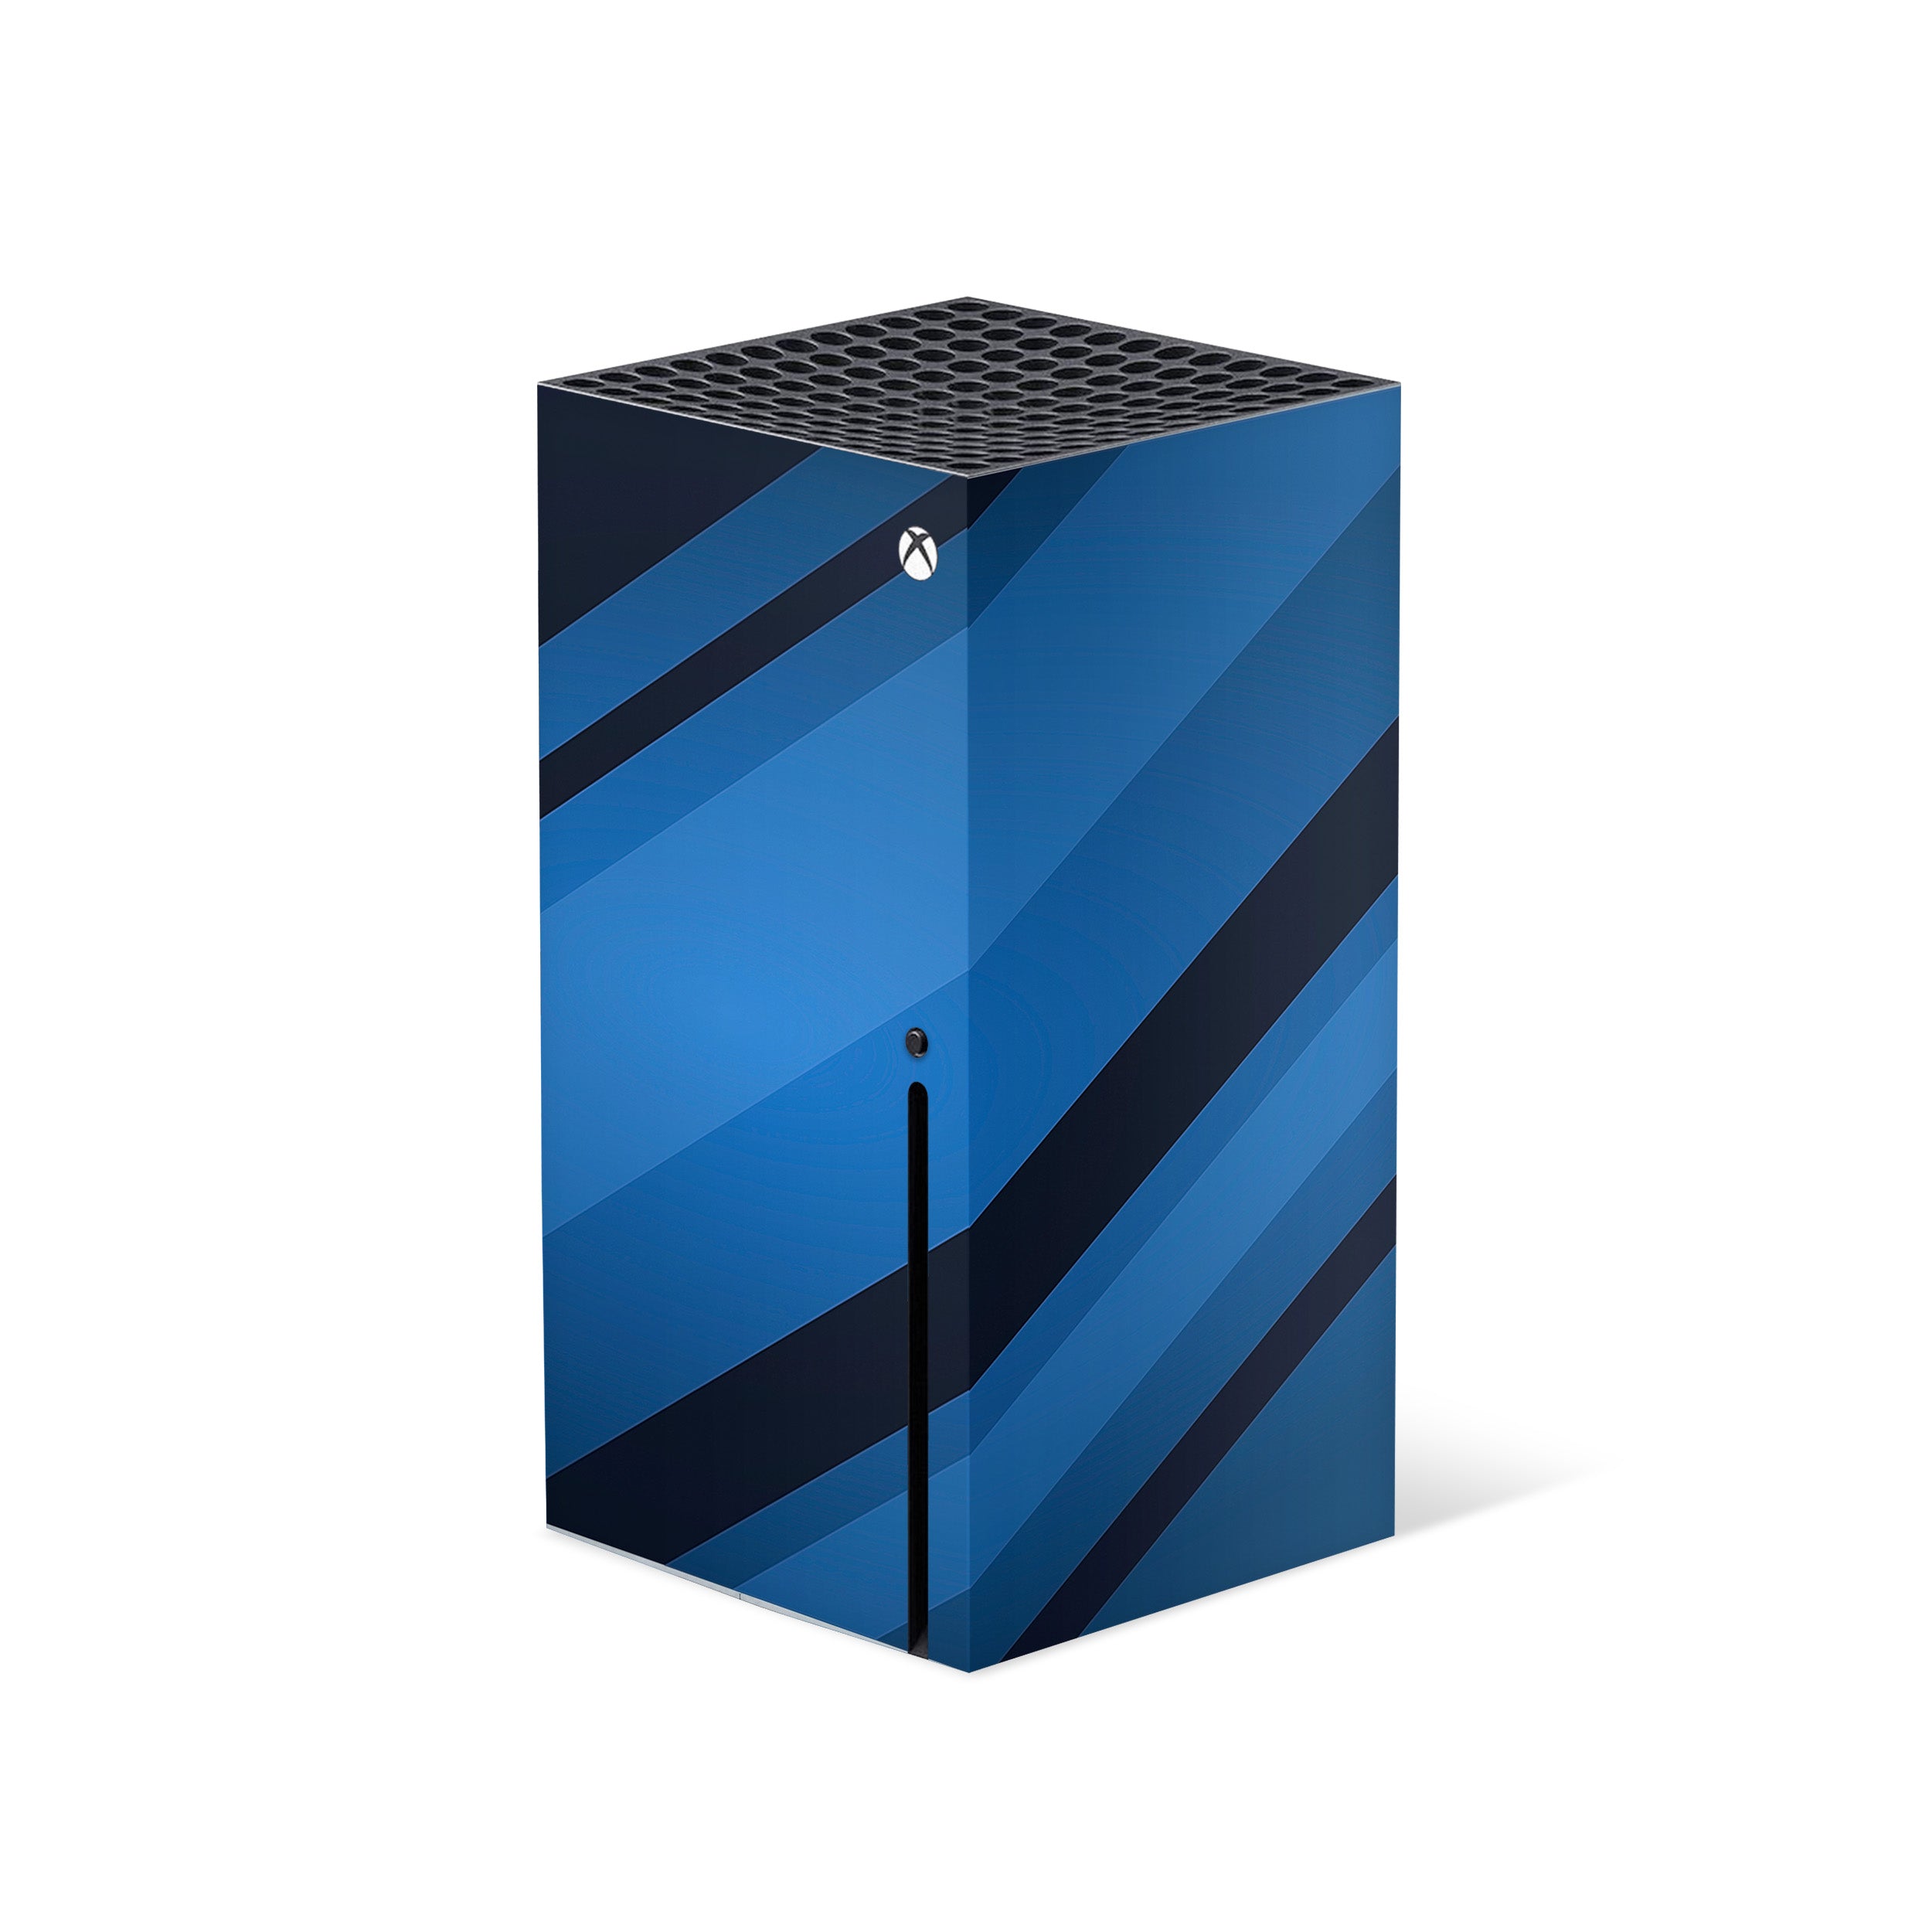 A video game skin featuring a Blue Streaks design for the Xbox Series X.